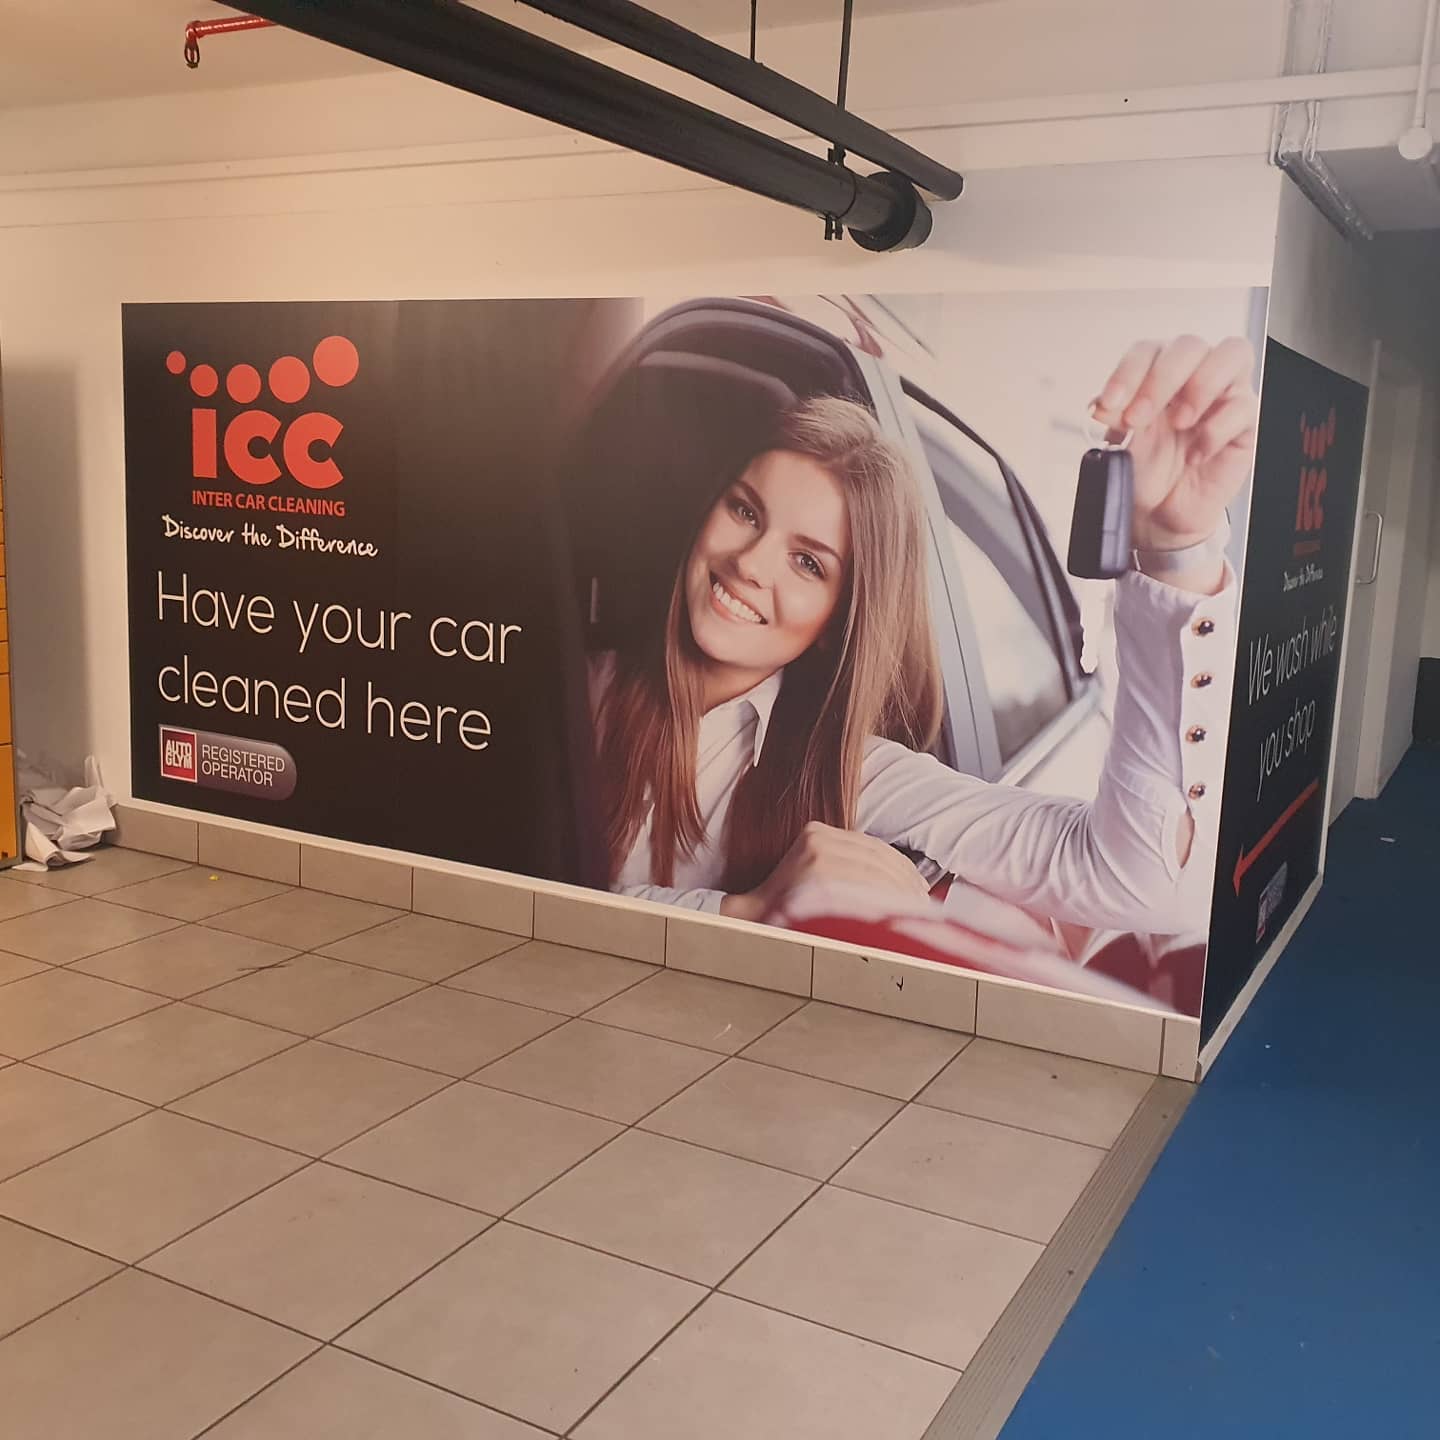 Fitting a wall graphic at @intuvictoriacentre Nottingham for @iccuklimited

To place an order for a custom wallpaper If at all possible PLEASE whatsapp me on 07702153393